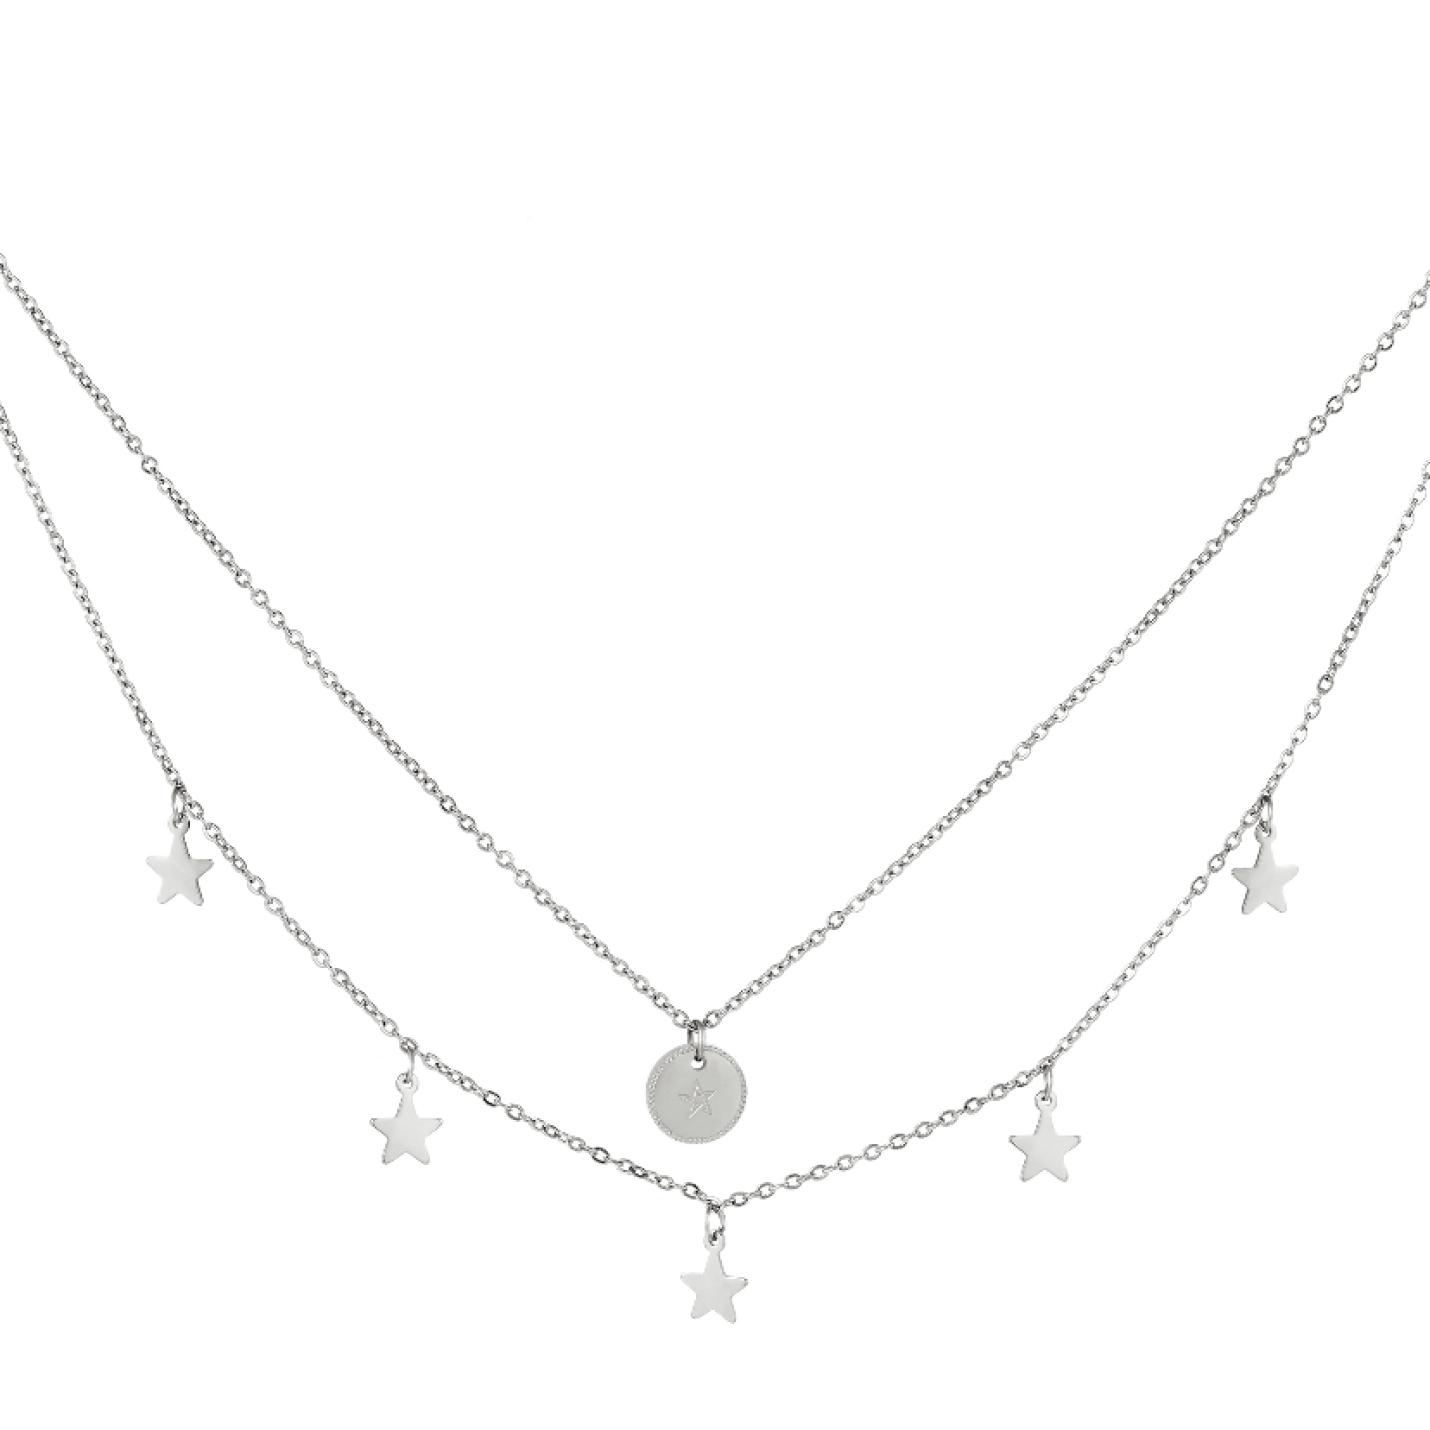 Roestvrij stalen ketting - Yehwang - Ketting - One size - Zilver